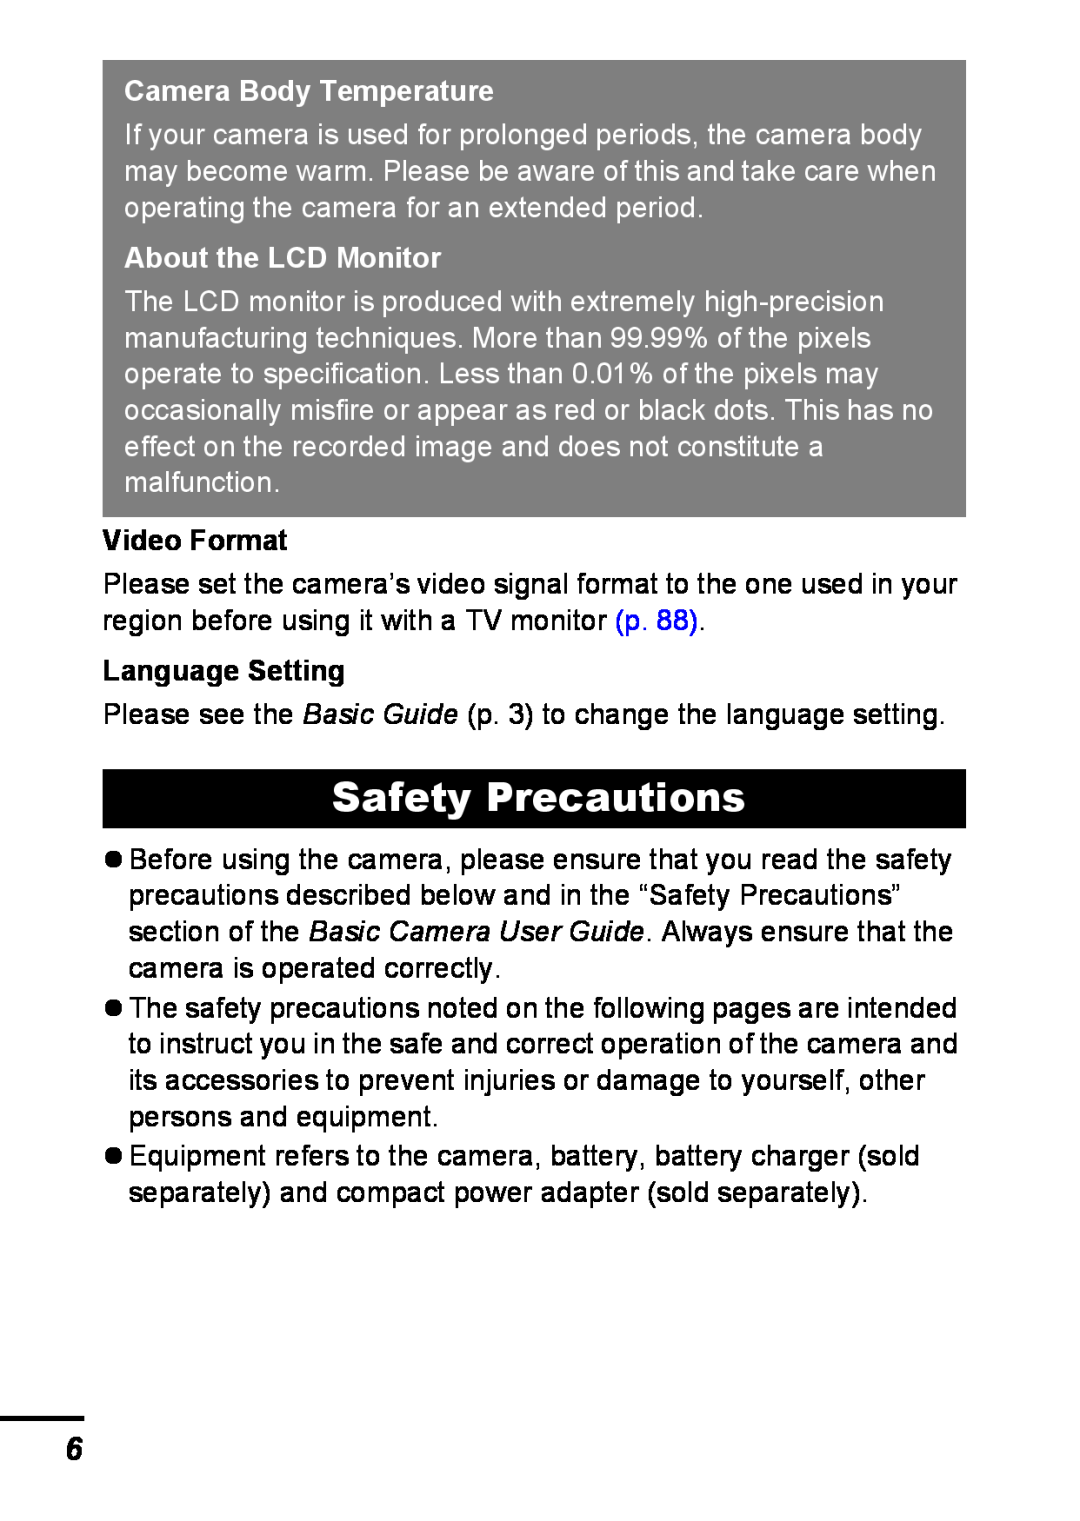 Canon A540 appendix Safety Precautions, Video Format, Language Setting, Camera Body Temperature, About the LCD Monitor 